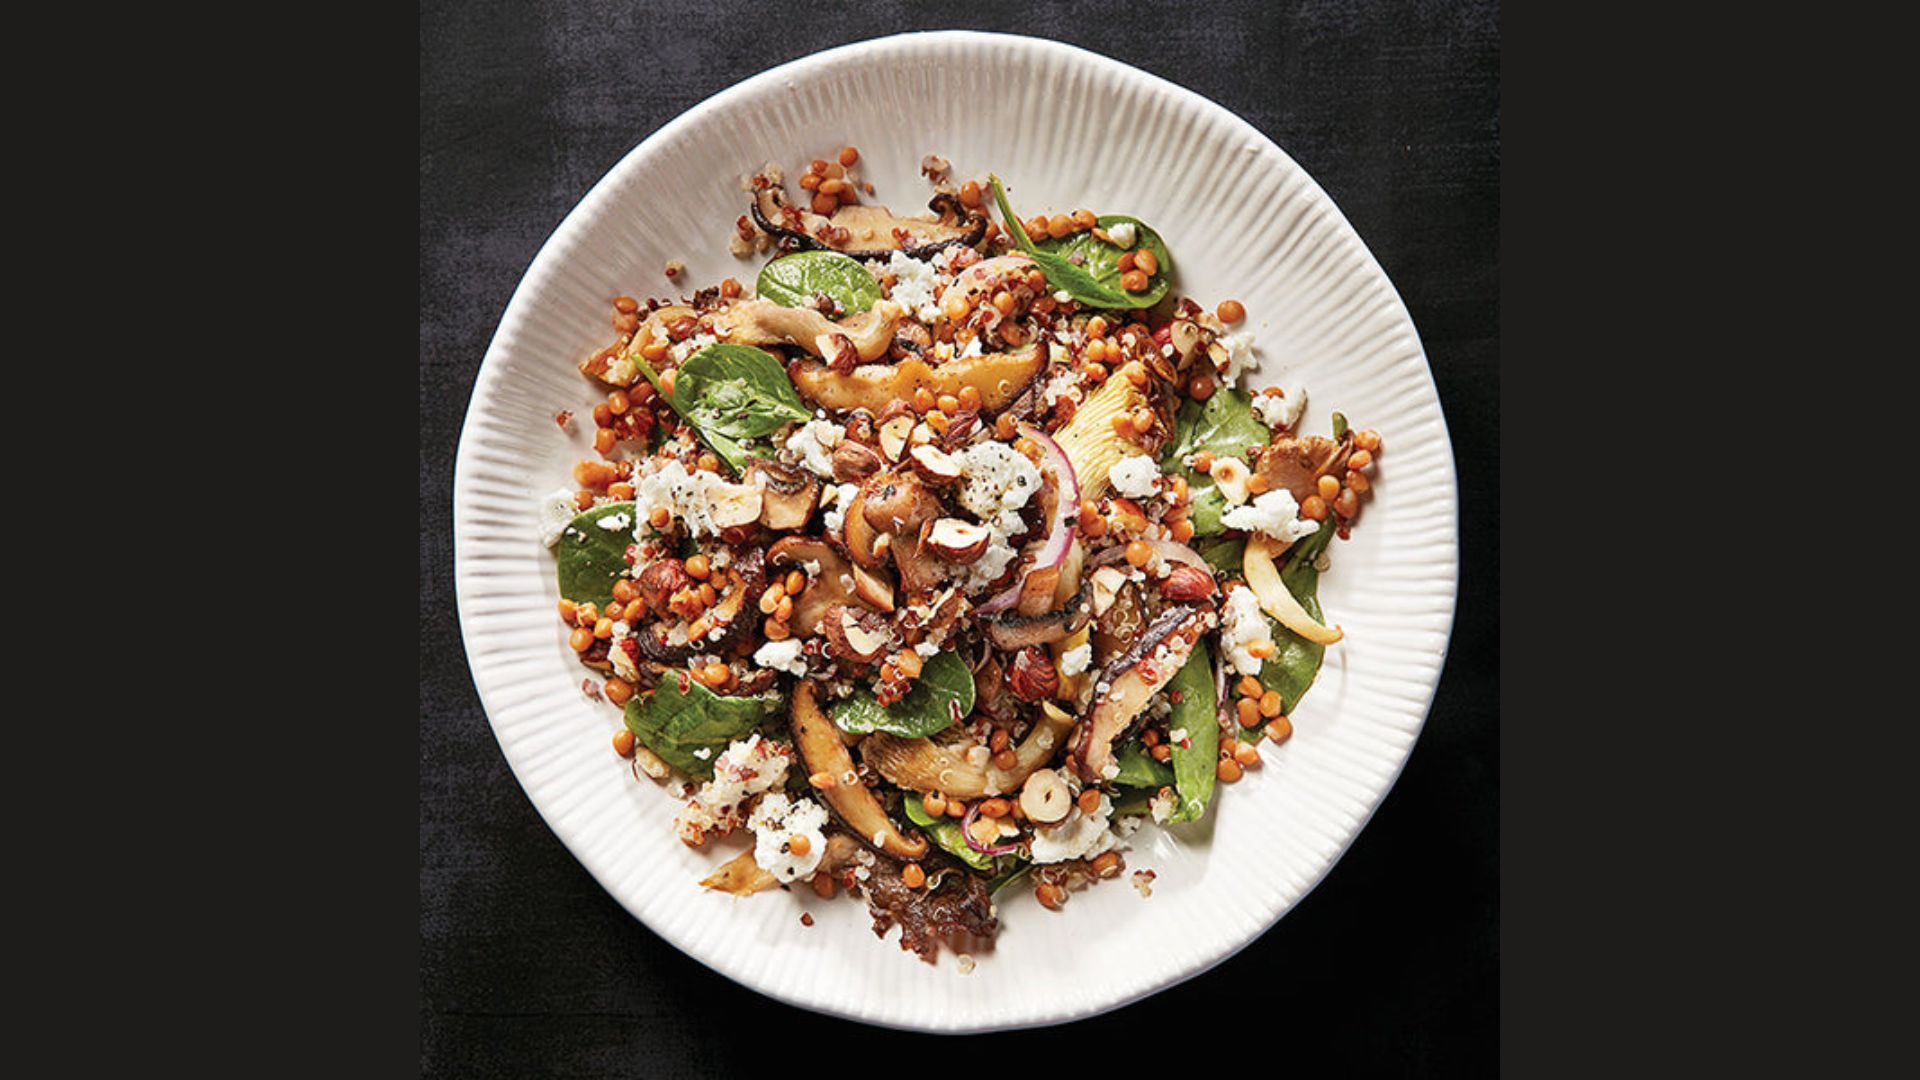 Image of Tuck's Summer Farro Salad with Goat Cheese & Arugula 